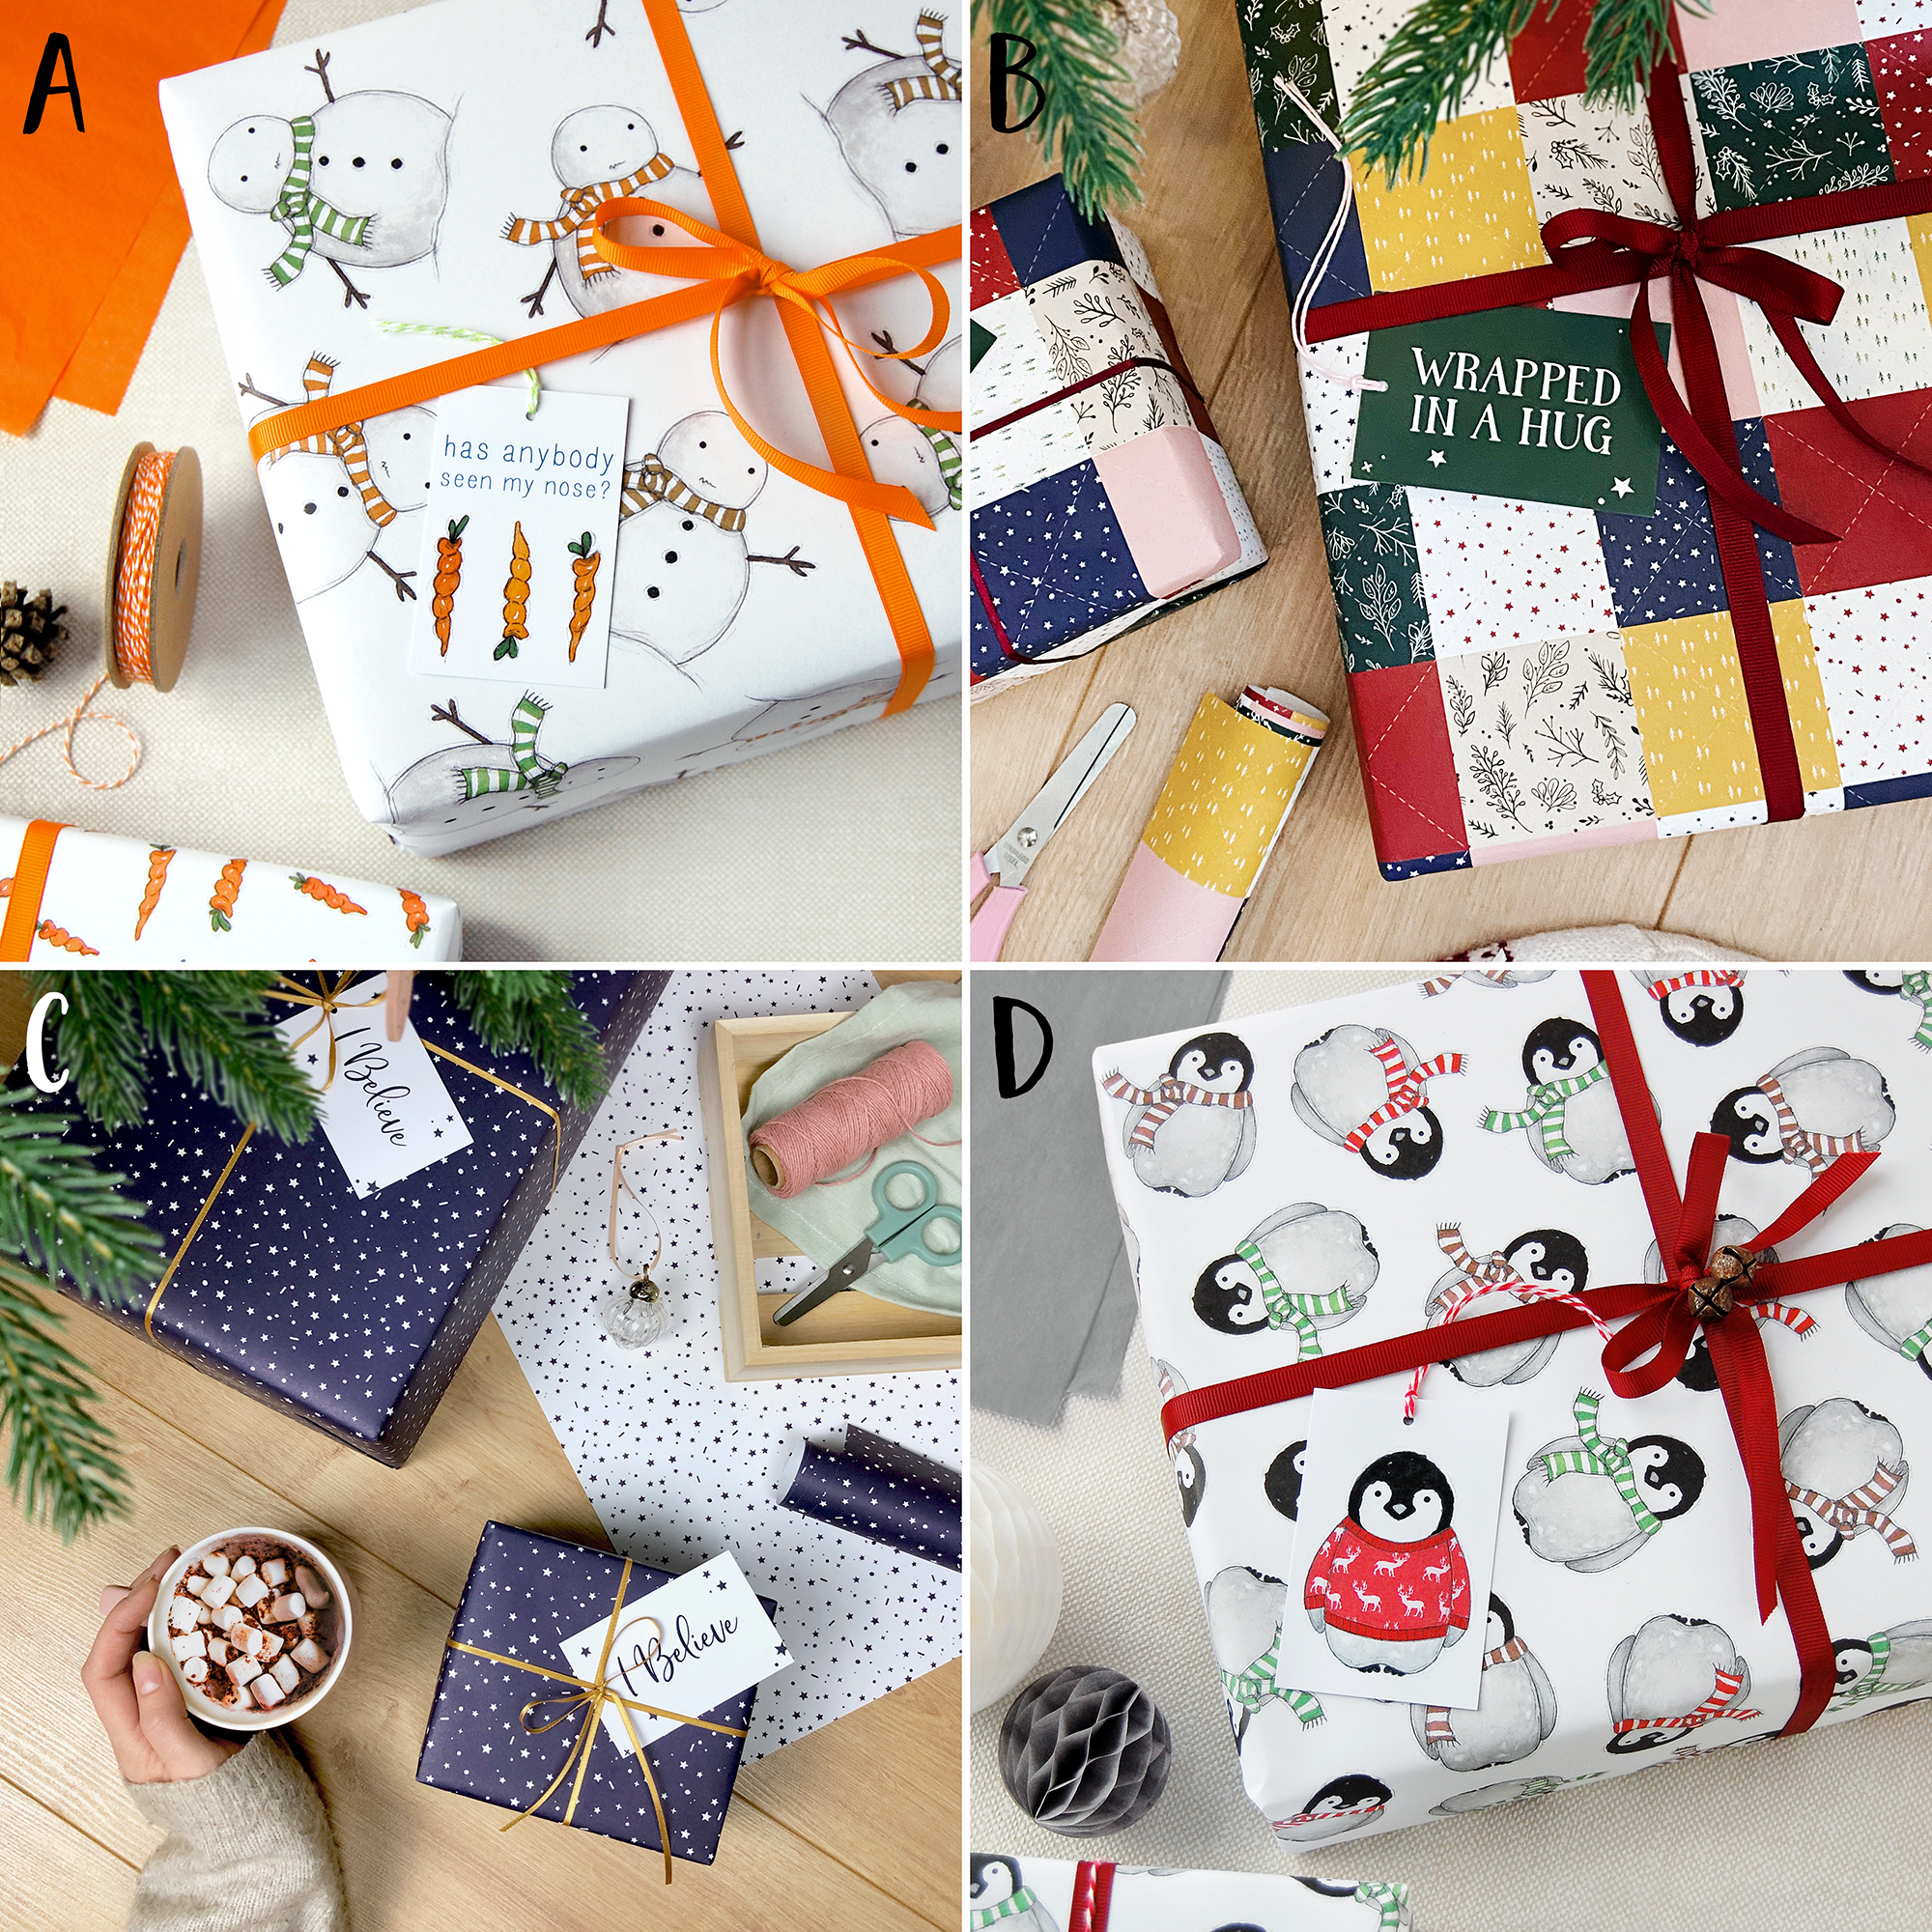 Why an advent calendar is the best gift - % Helloprint